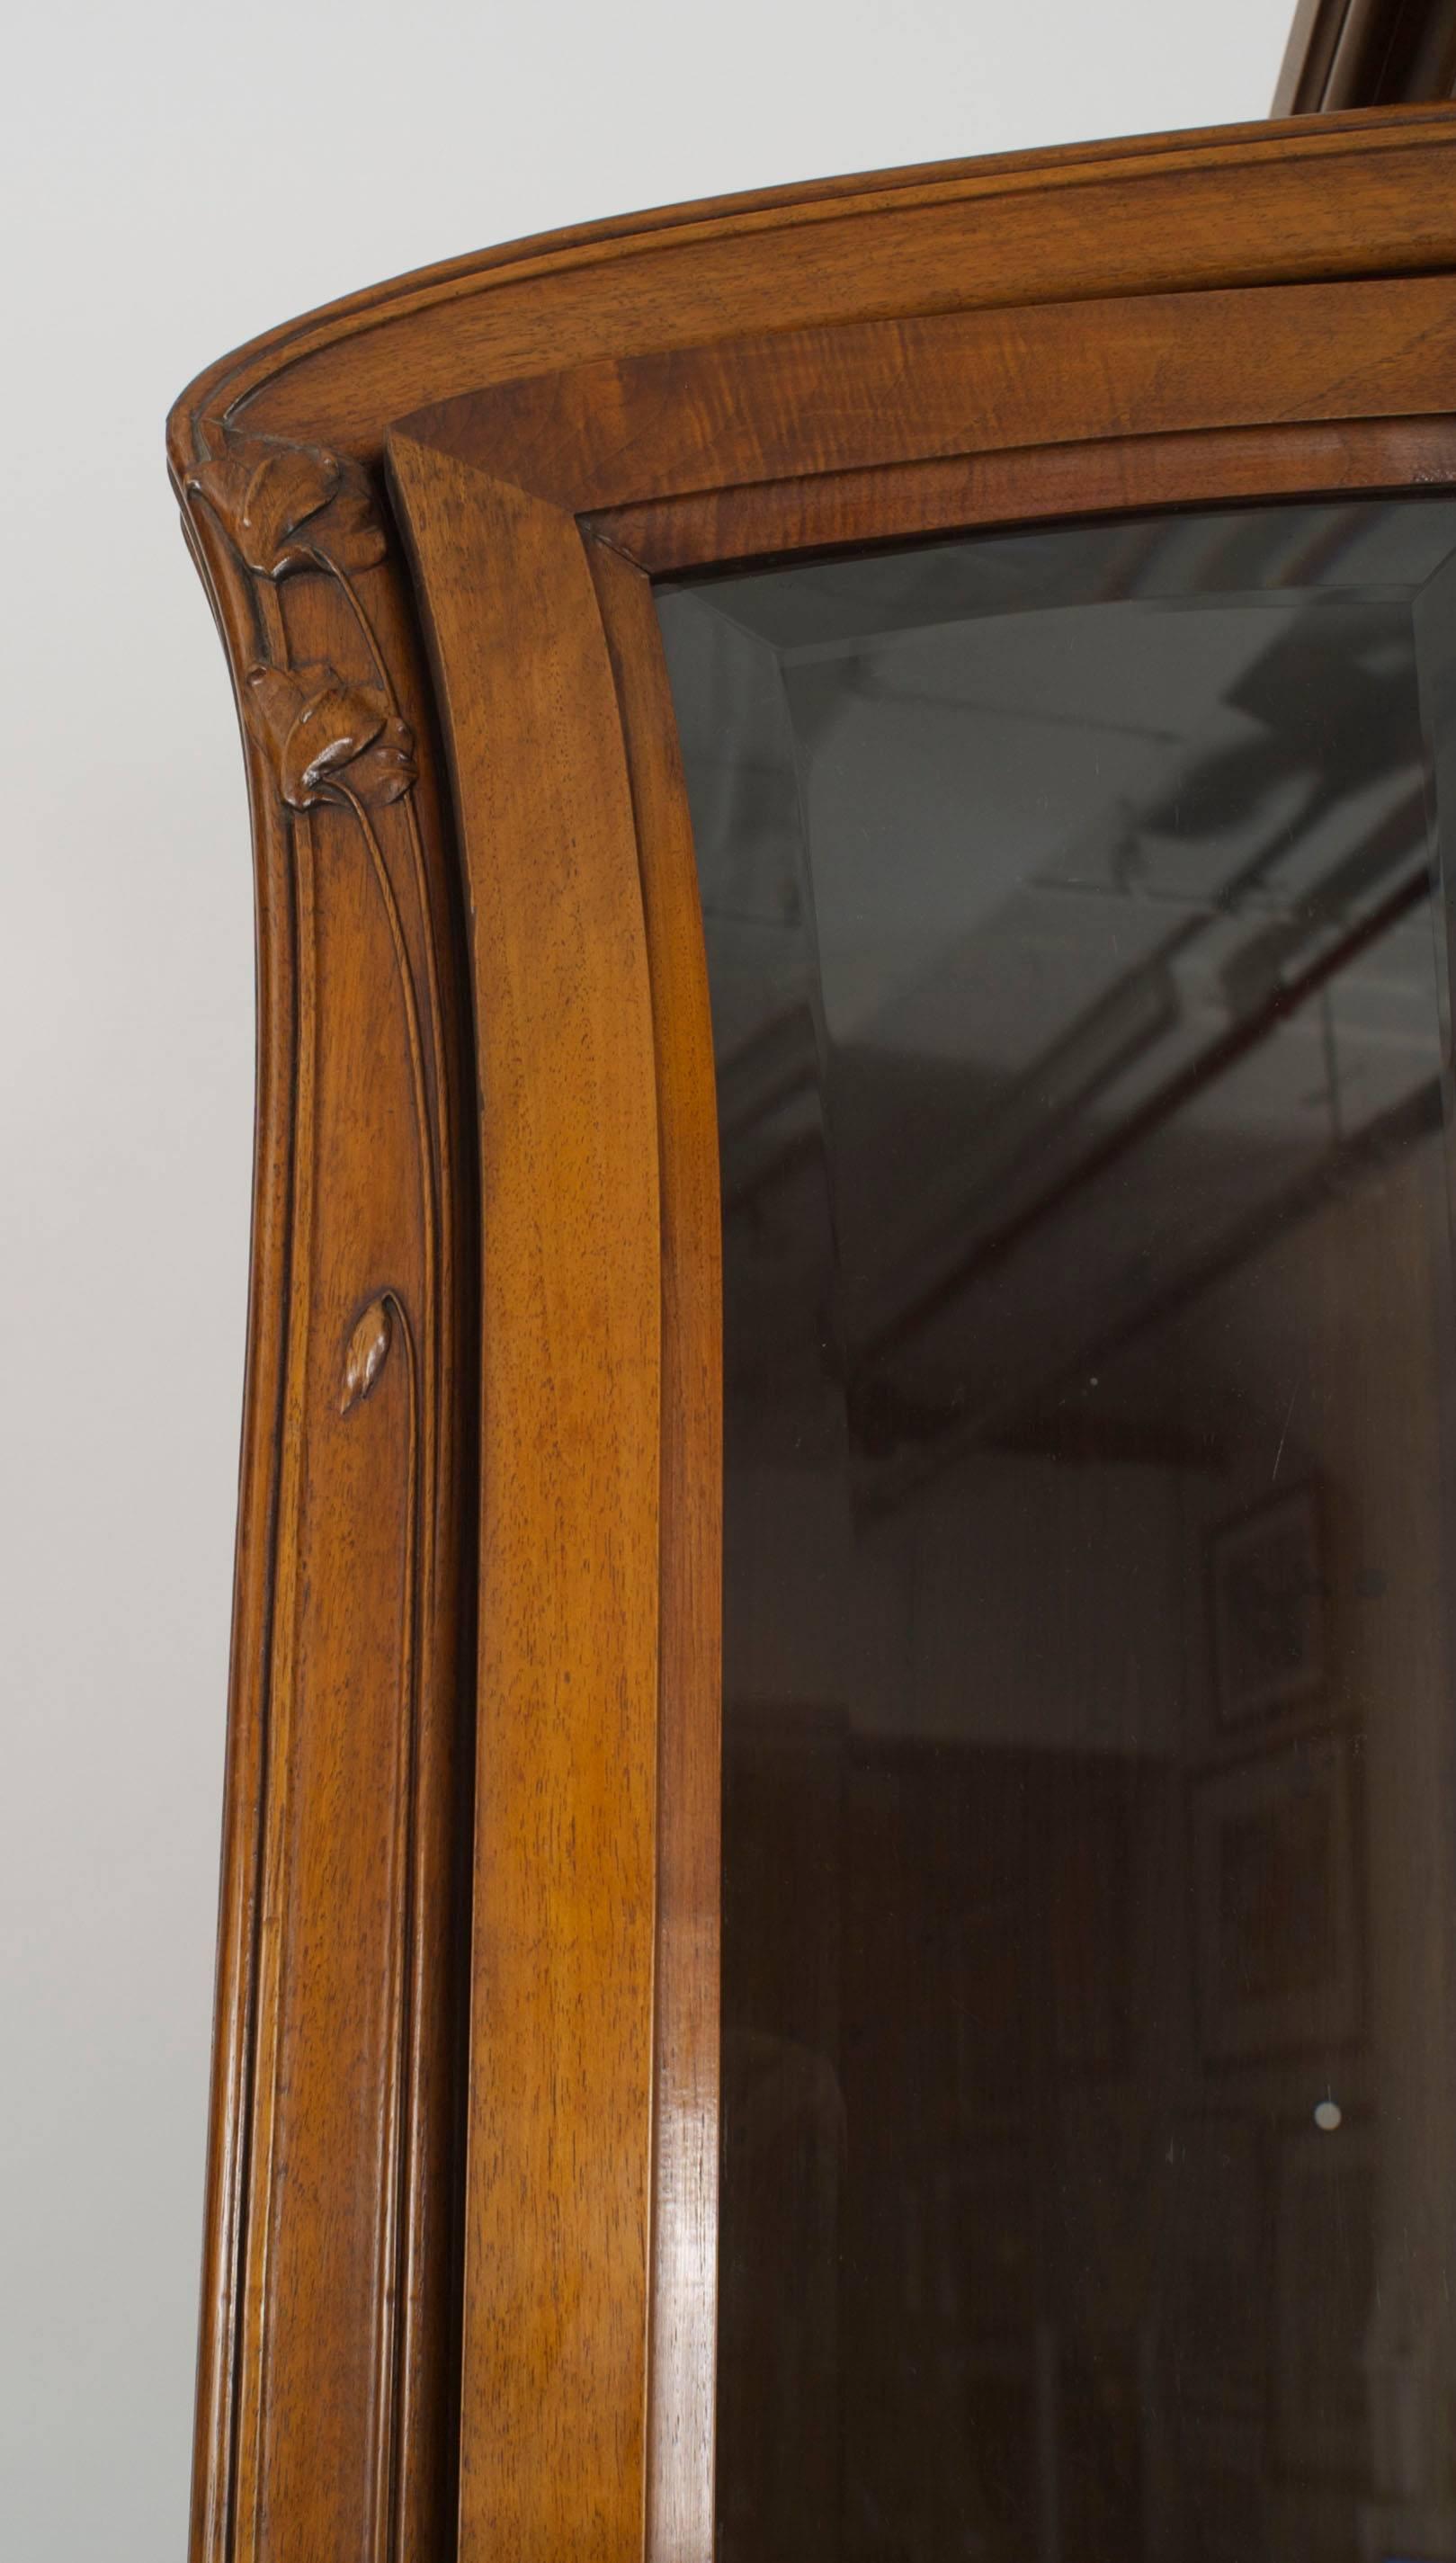 French Art Nouveau walnut display cabinet with 3 beveled glass doors and a floral carved center pediment and side corners.
